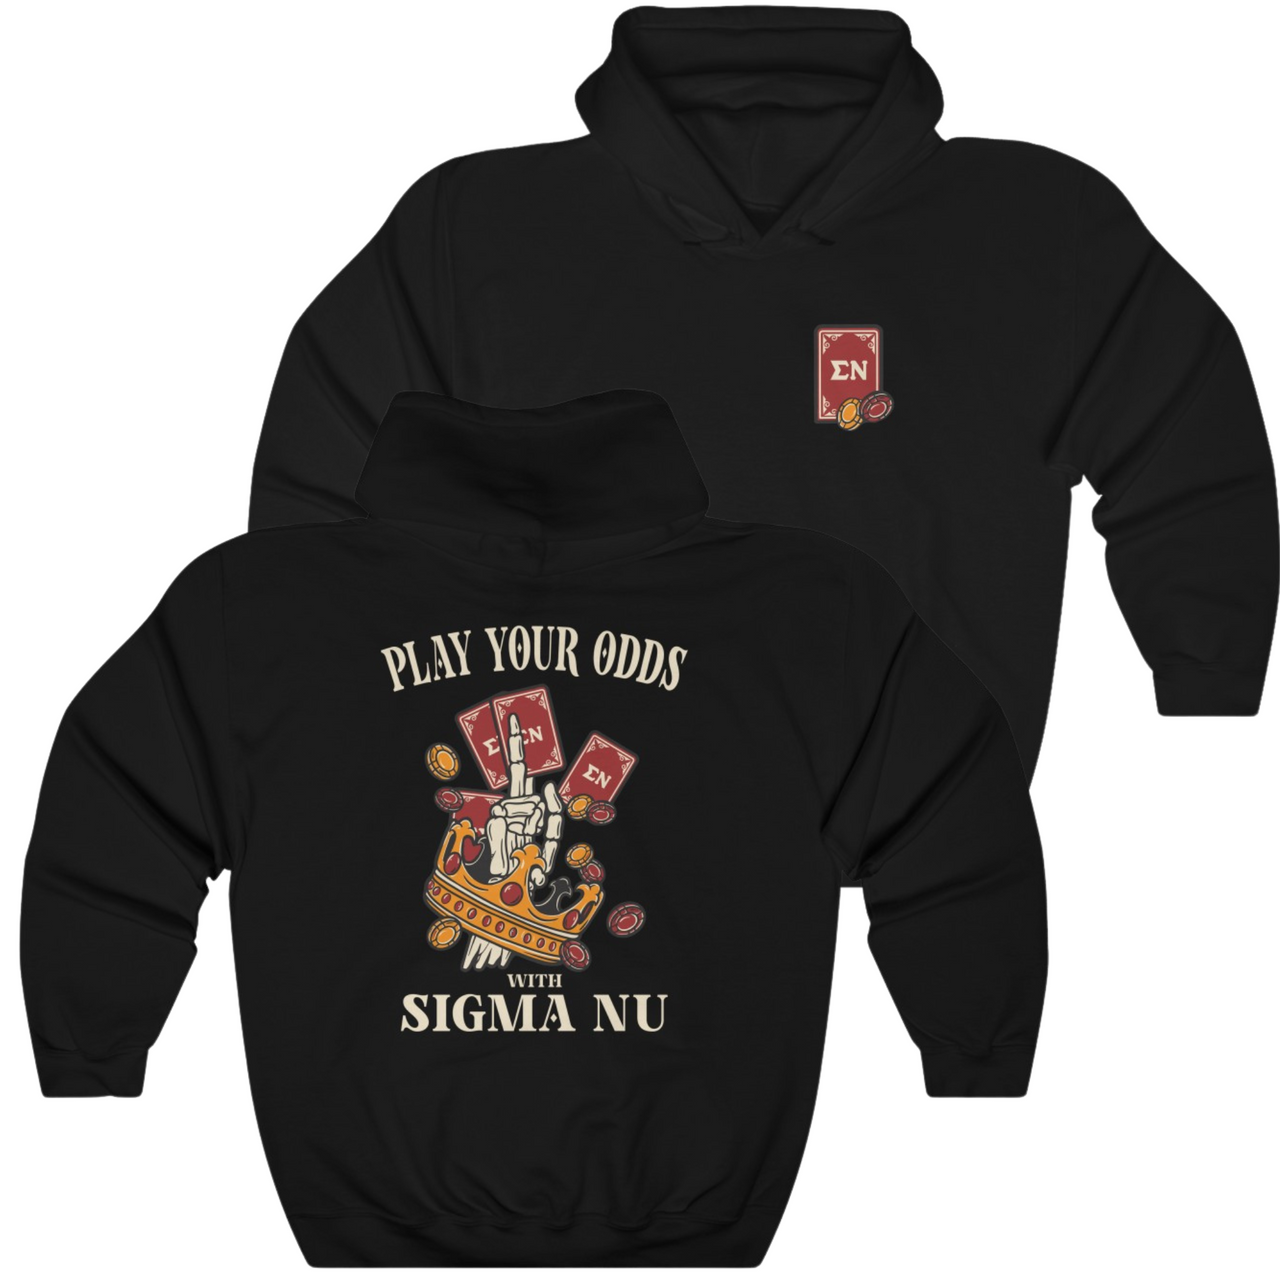 Sigma Nu Graphic Hoodie | Play Your Odds | Sigma Nu Clothing, Apparel and Merchandise